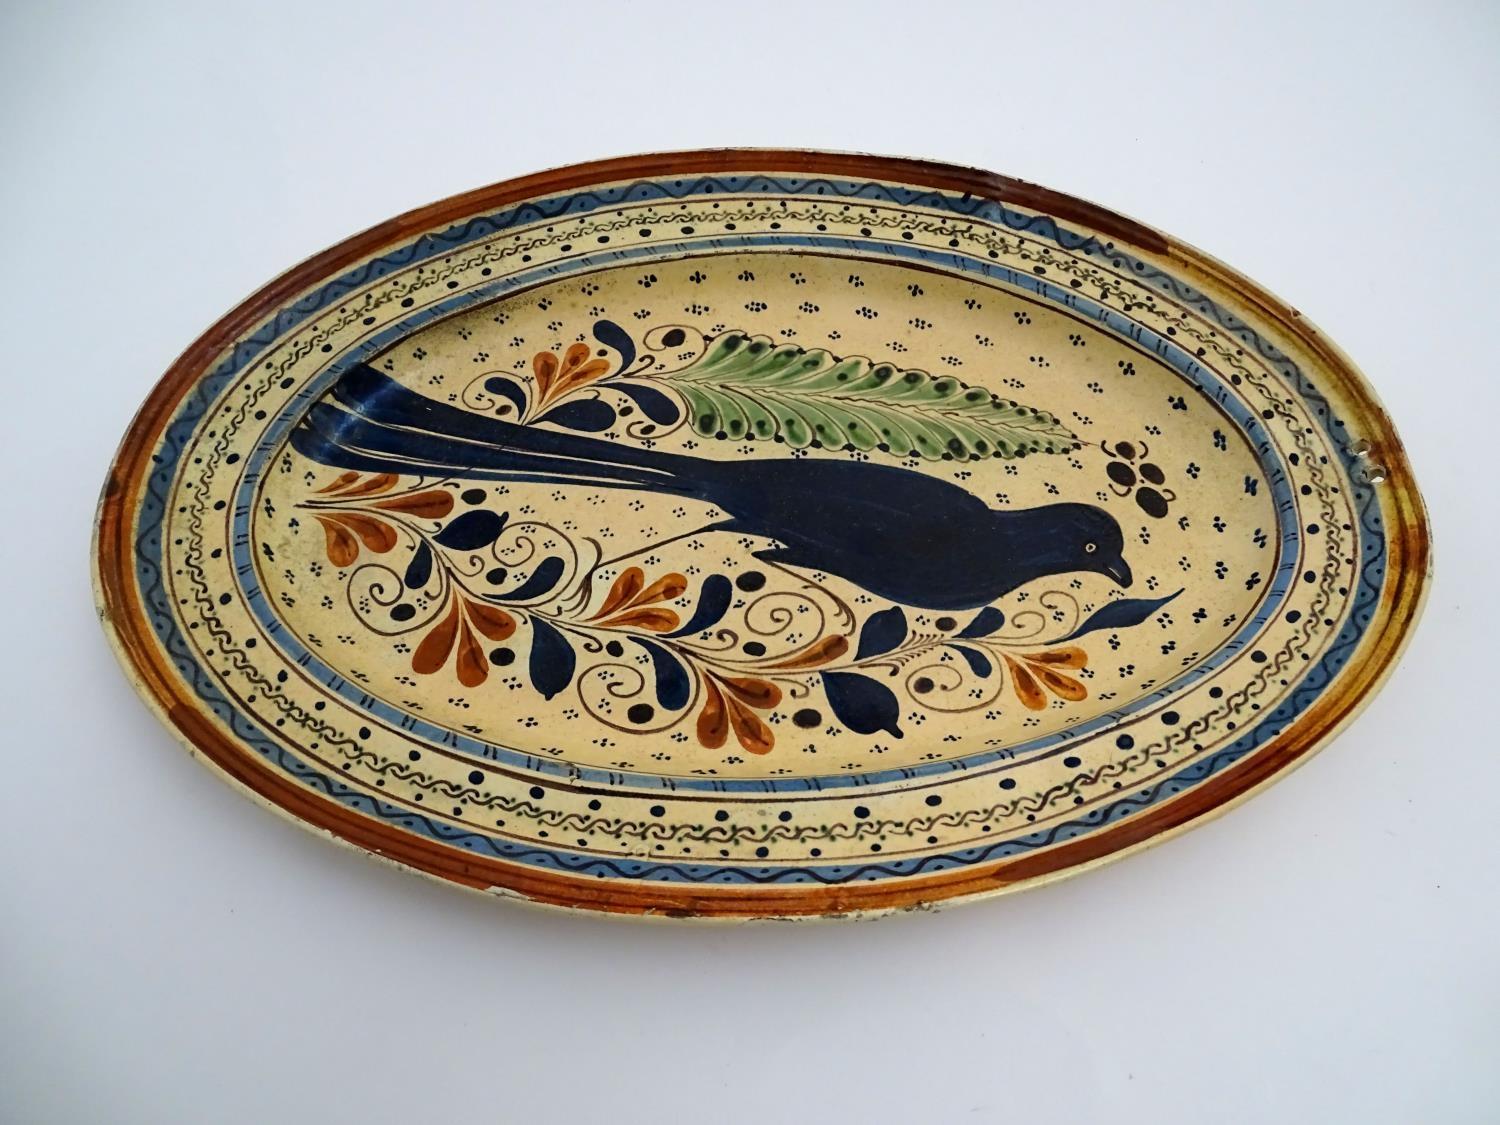 A Swiss terracotta oval pottery dish with hand painted folk art decoration depicting a bird - Image 3 of 6